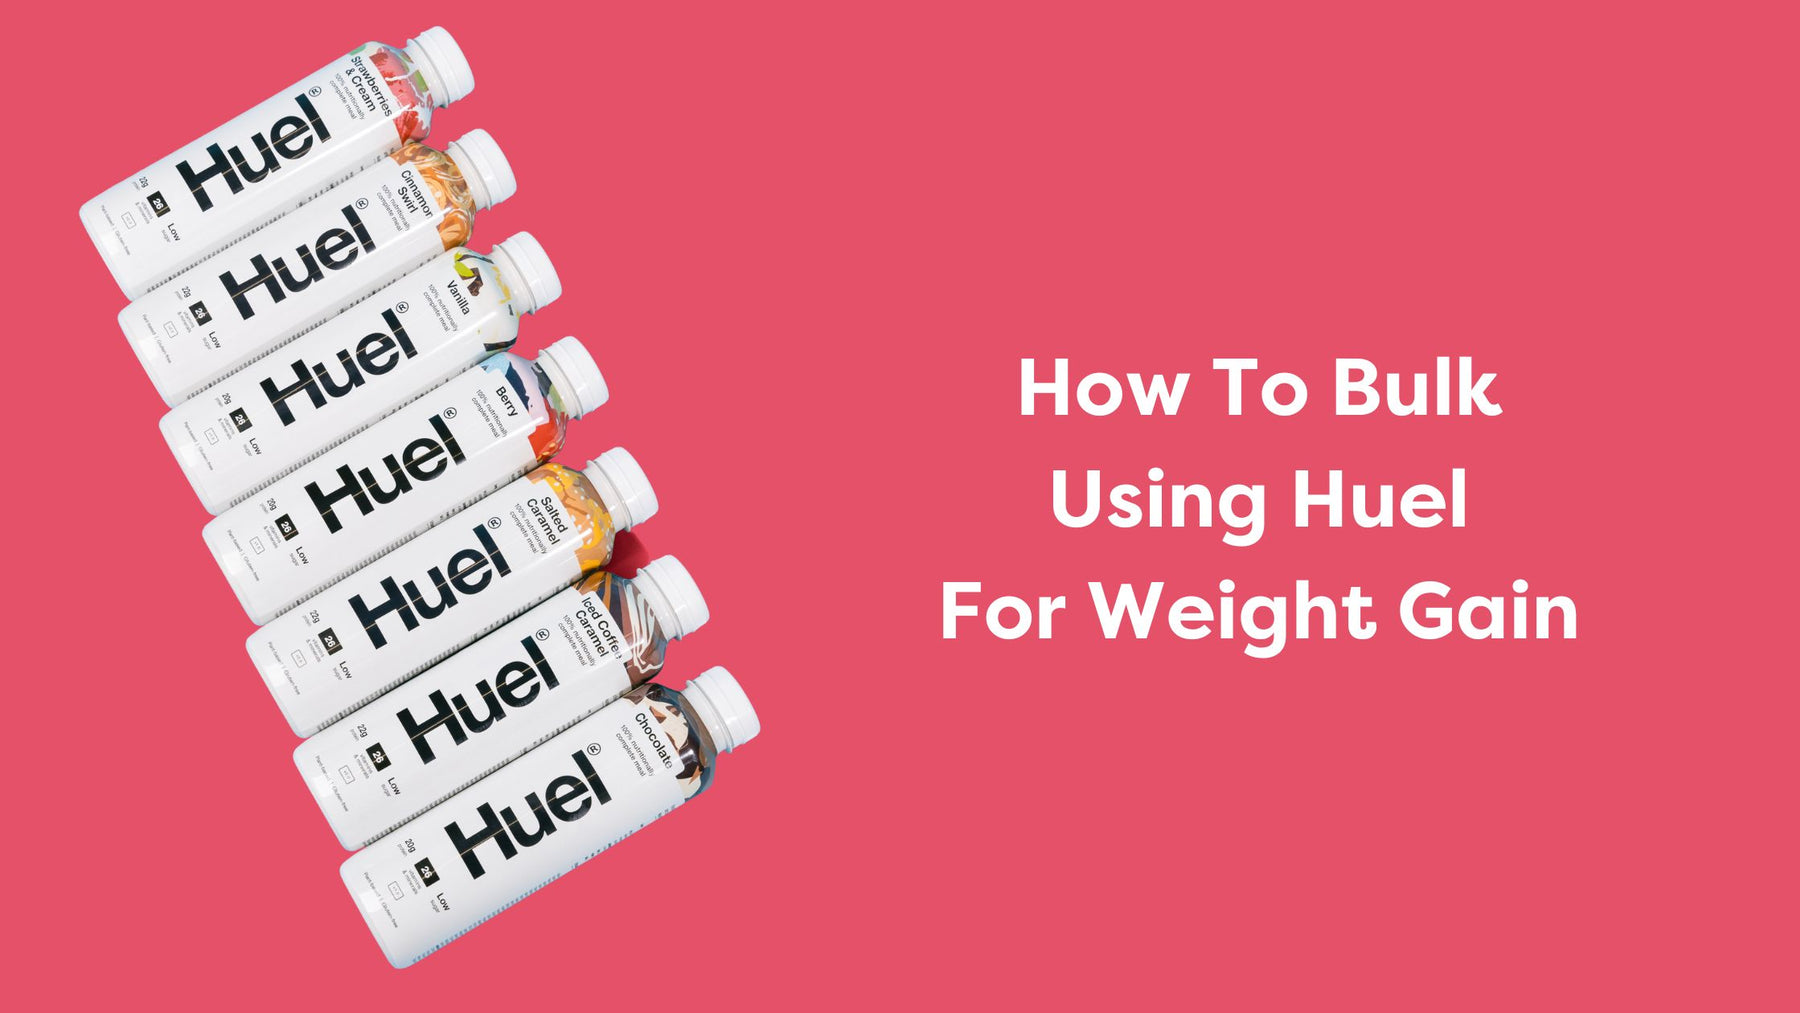 How To Bulk Using Huel for Weight Gain